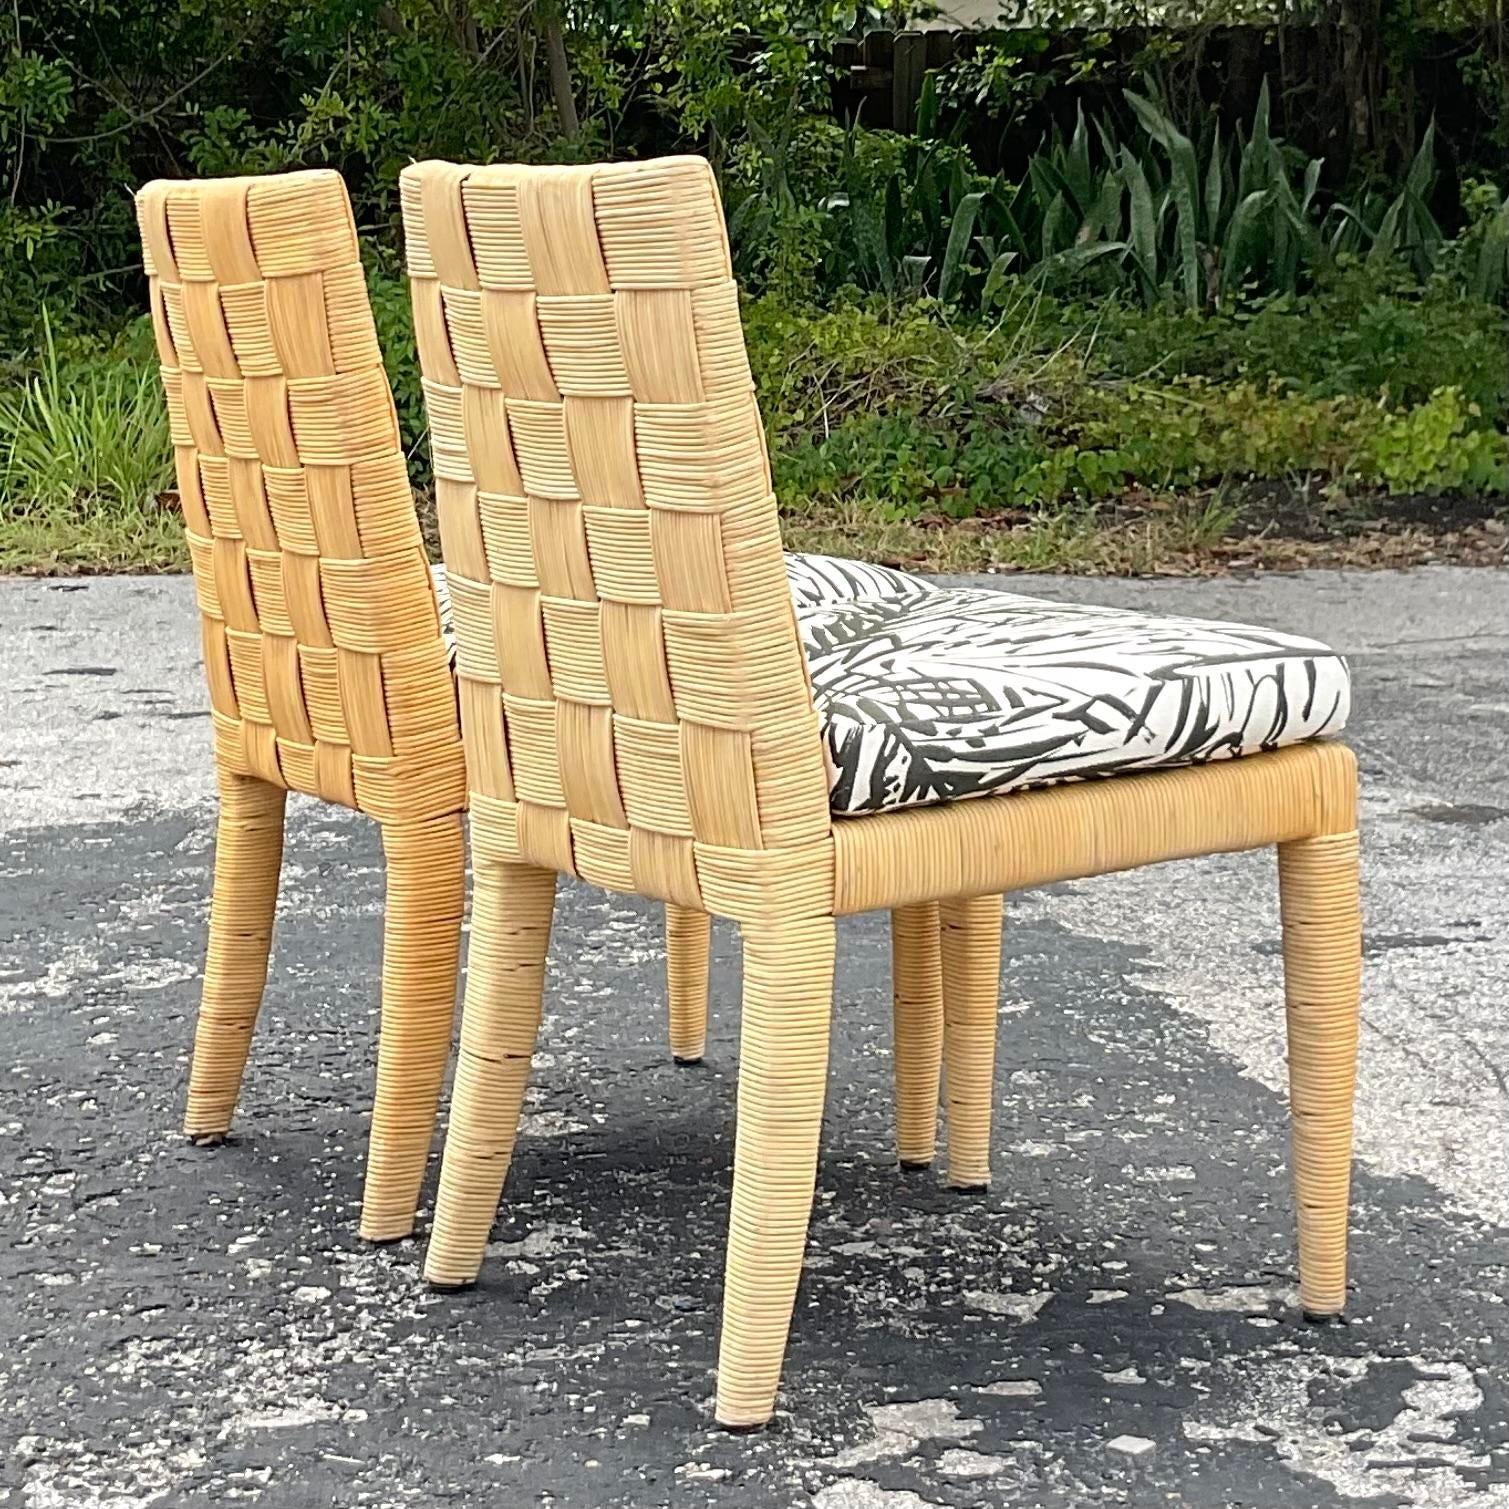 Upholstery Vintage Coastal Donghia Block Island Dining Chairs - a Pair For Sale